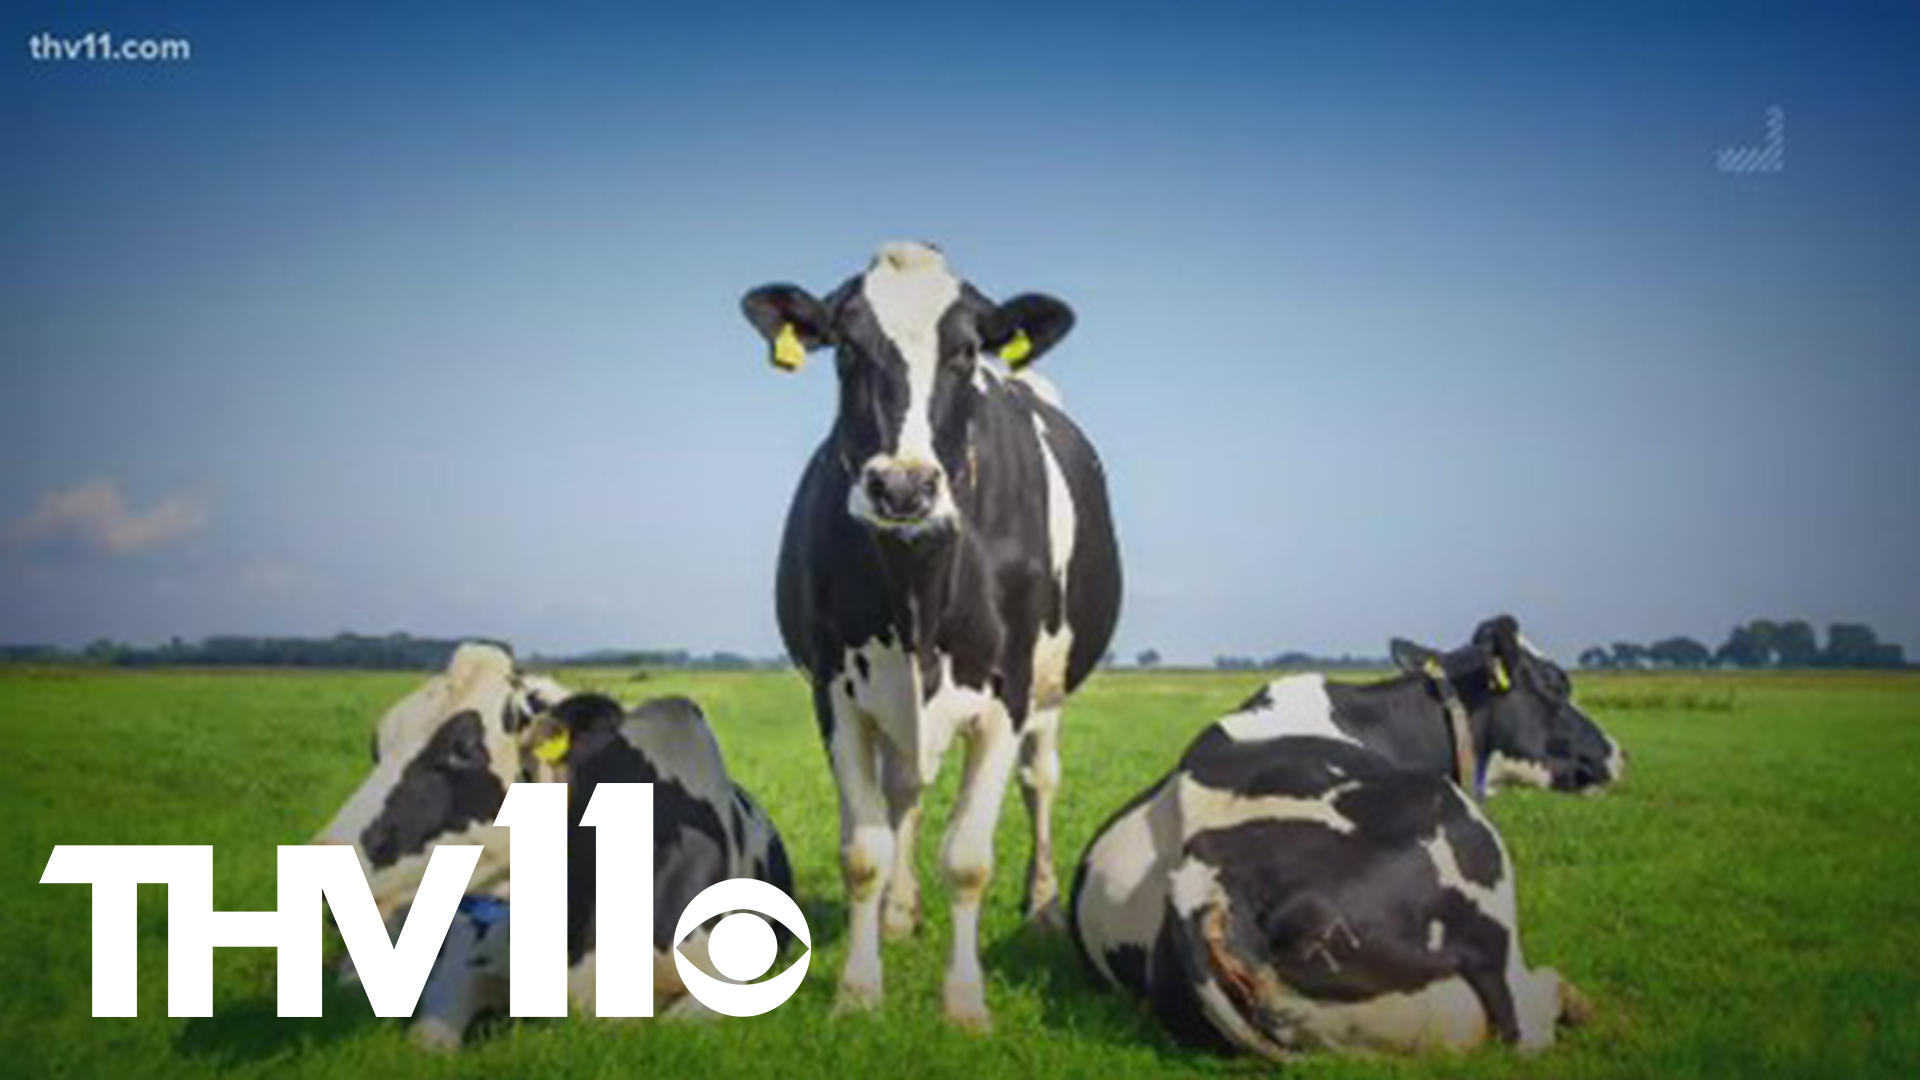 THV11 Meteorologist Corallys Ortiz finds out what the science says when it comes to animals predicting the weather - specifically cows.